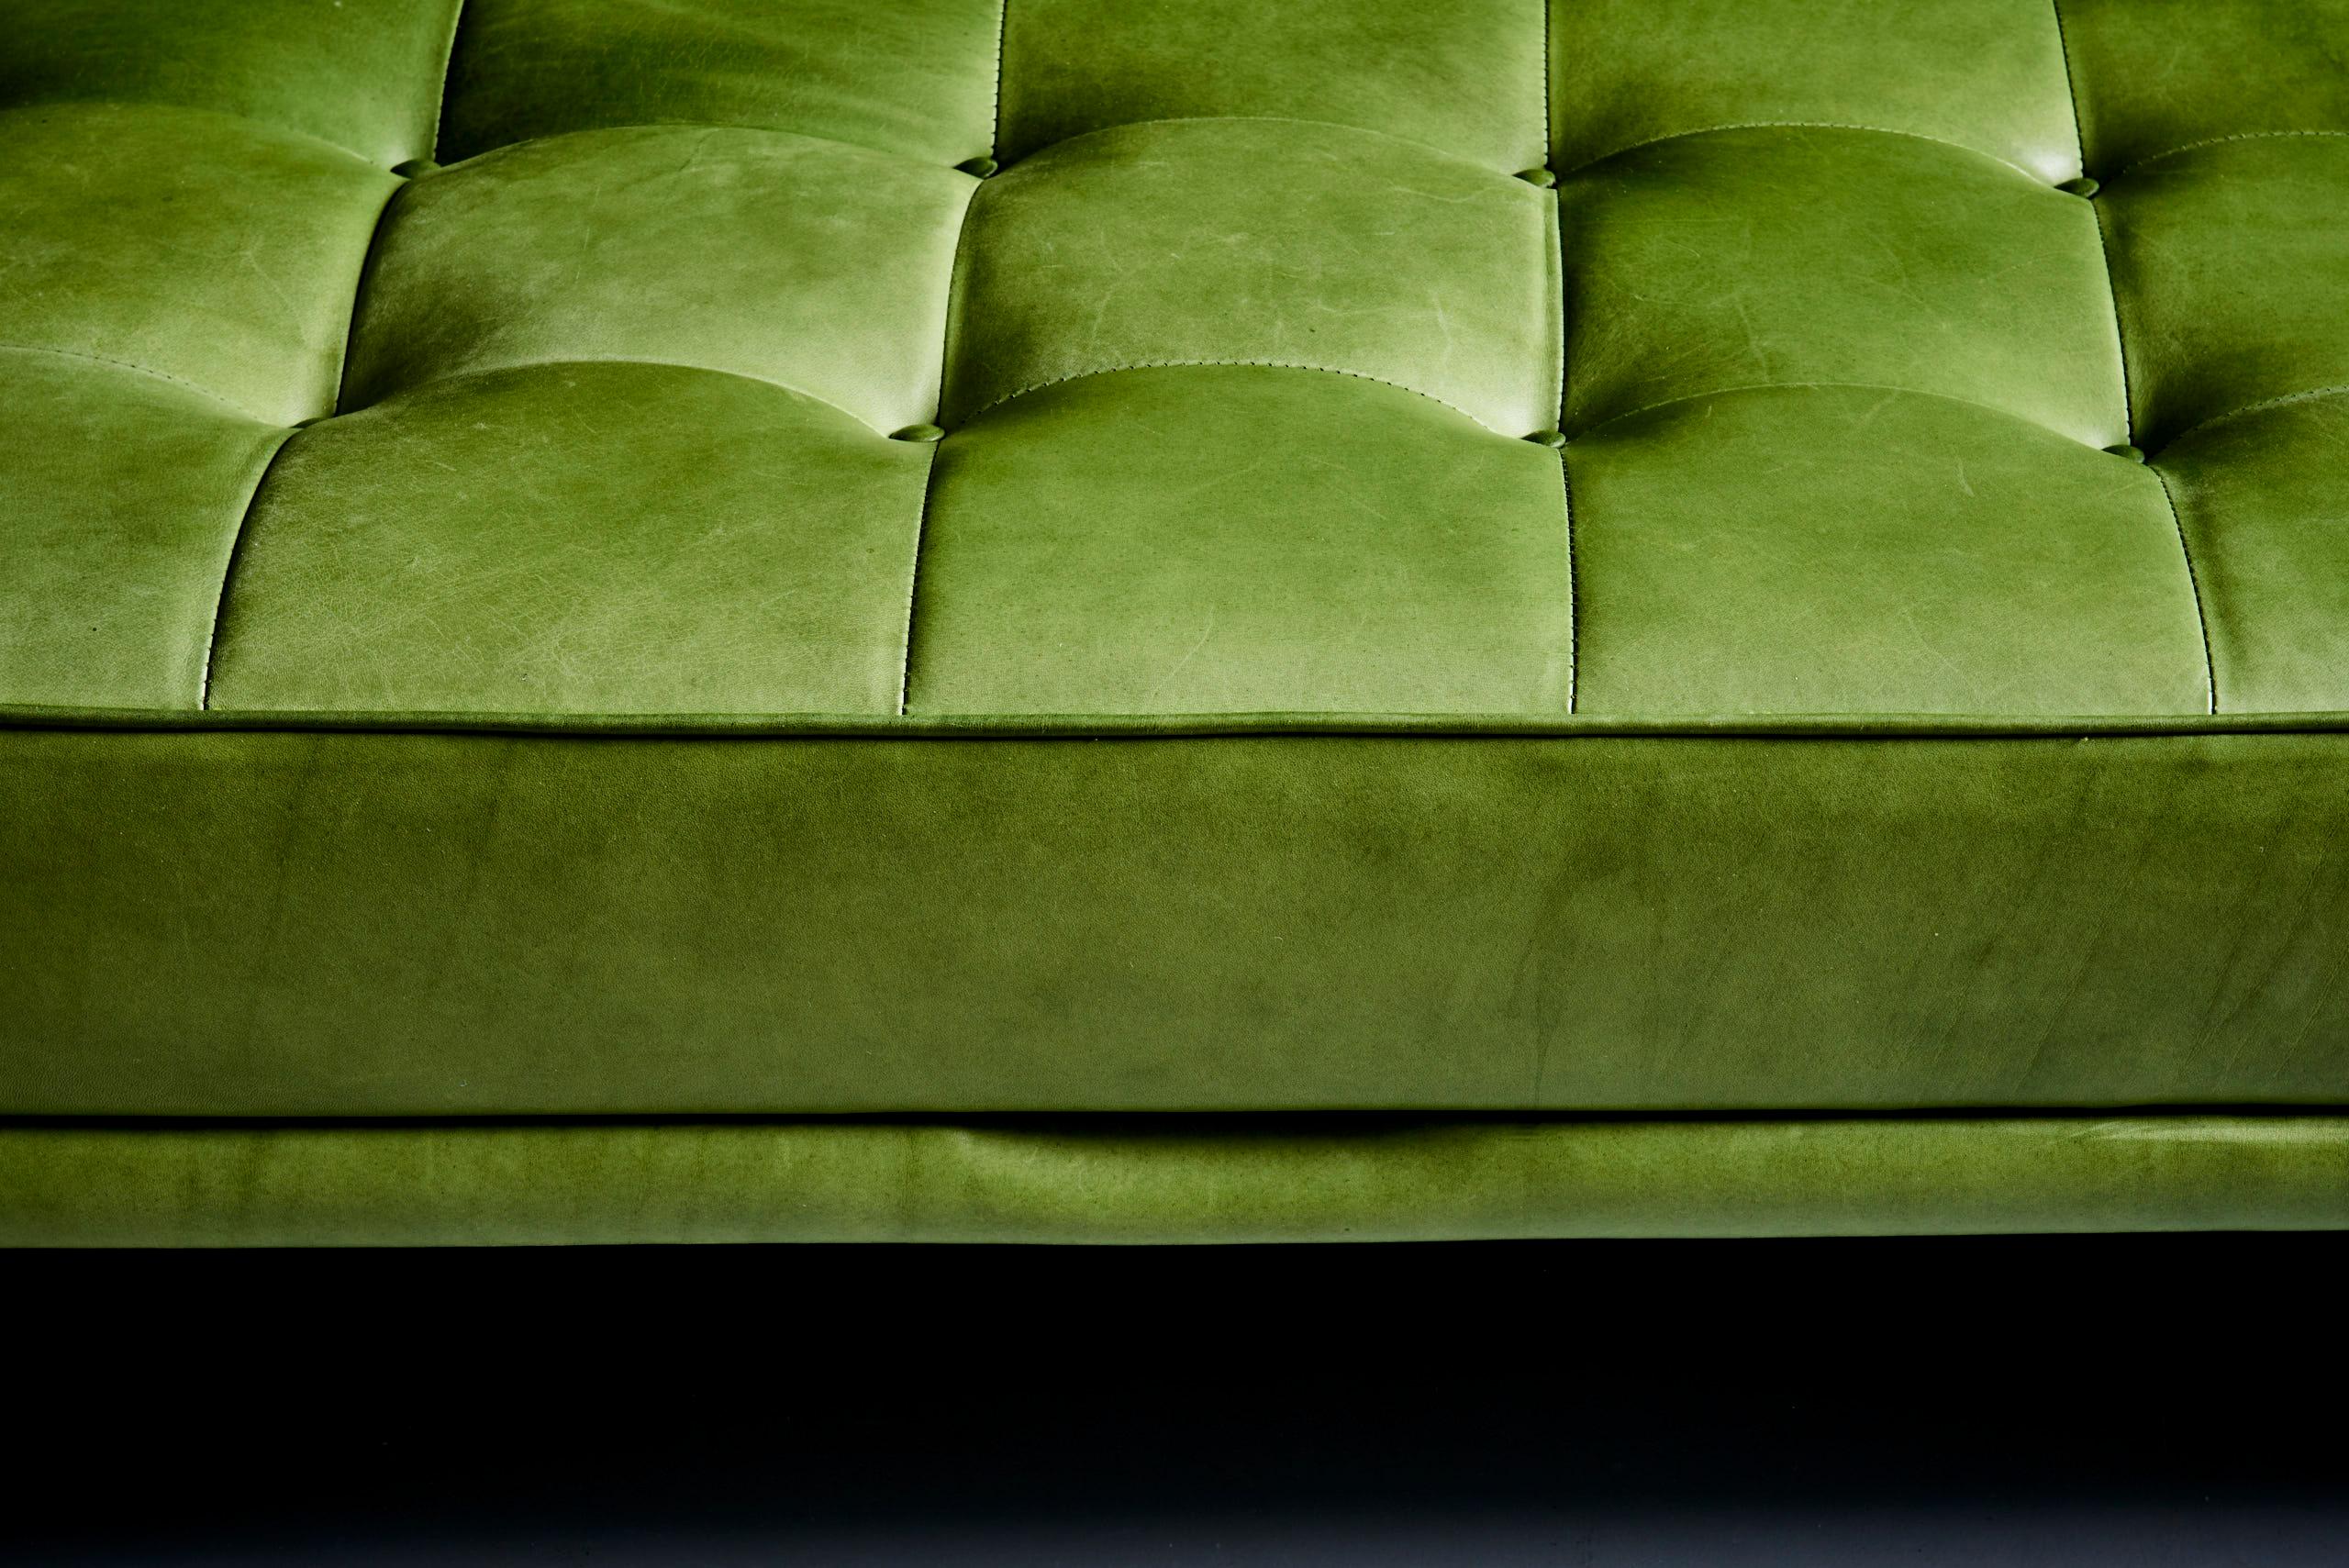 Reupholstered Johannes Spalt Sofa Daybed for Wittmann, 1960s in green leather  For Sale 4